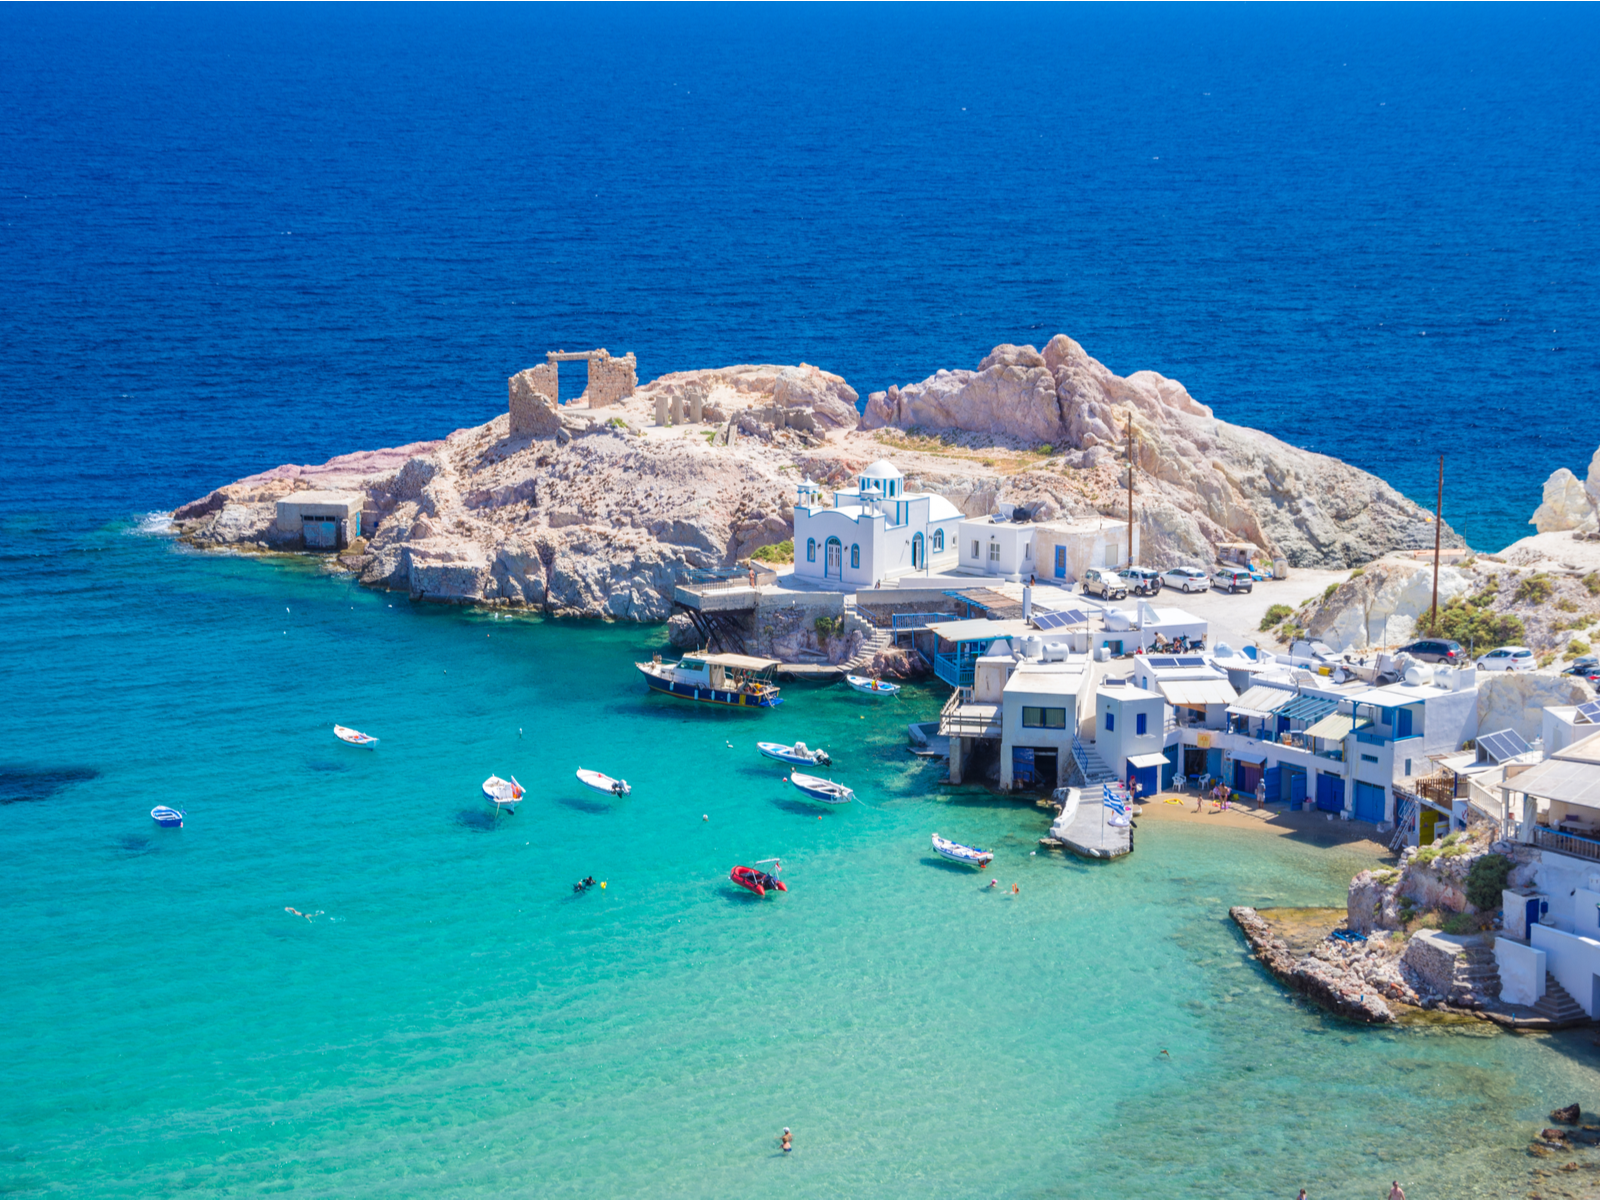 Aerial view of Firopotamos Village at Milos Island, a piece on the best islands in Greece to visit, where seen traditional fishermen's houses erected near at its coast and small fishing boats floating on crystal clear waters